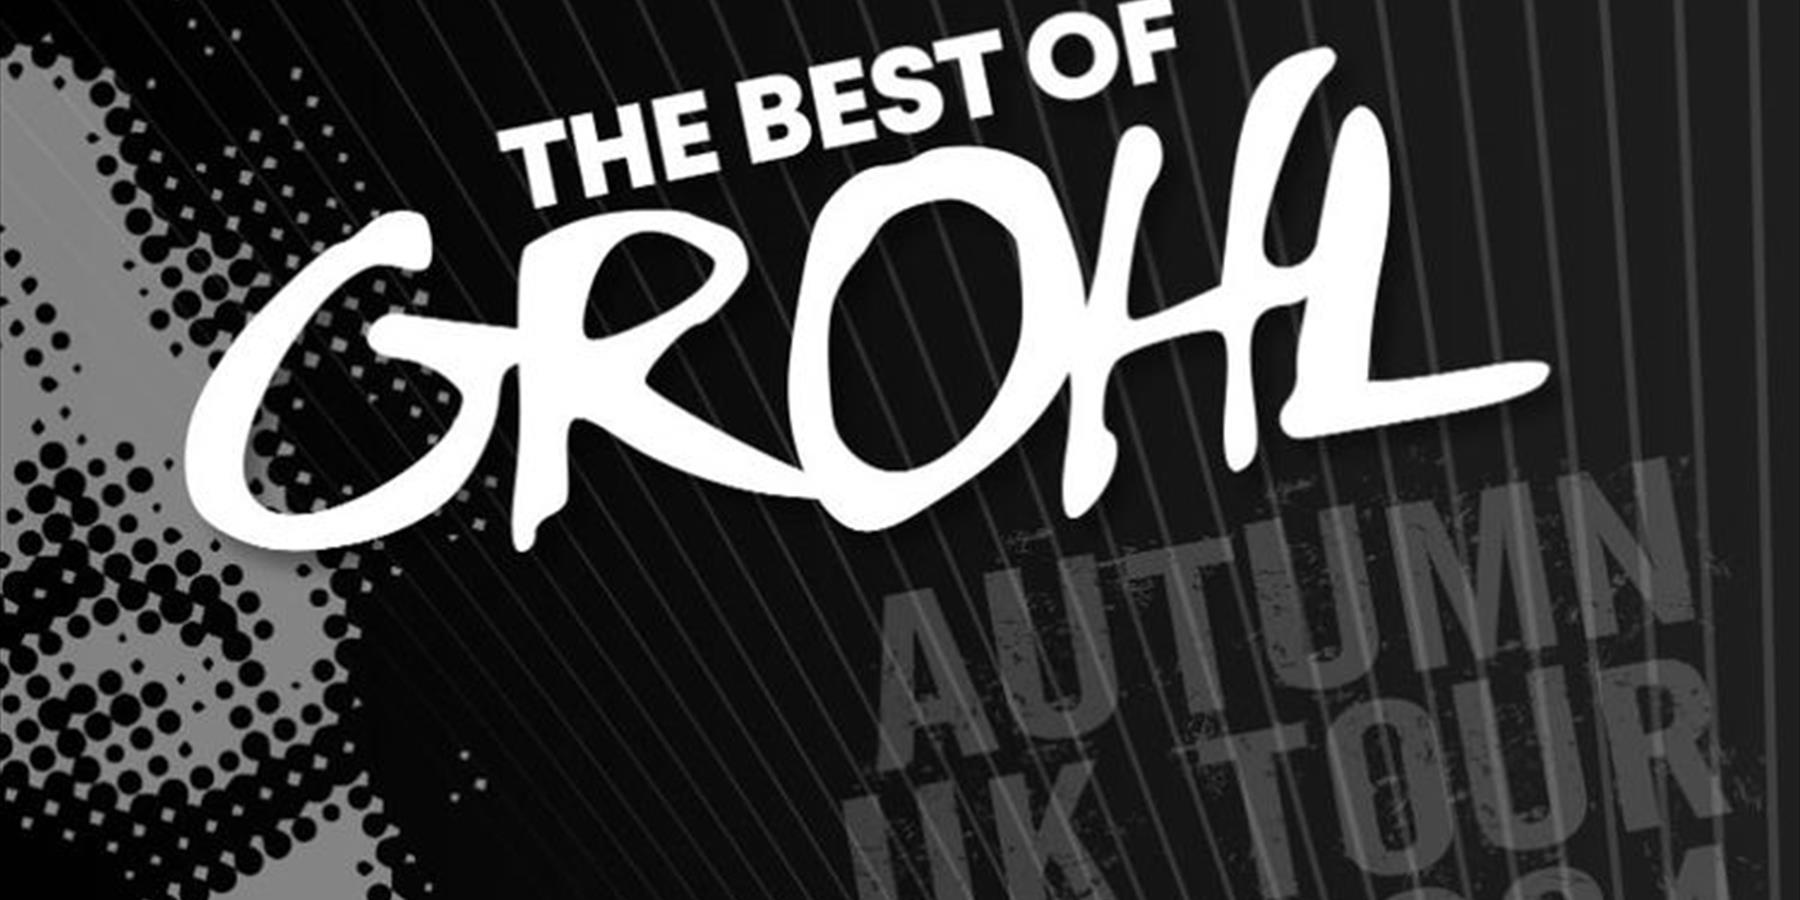 The Best of Grohl